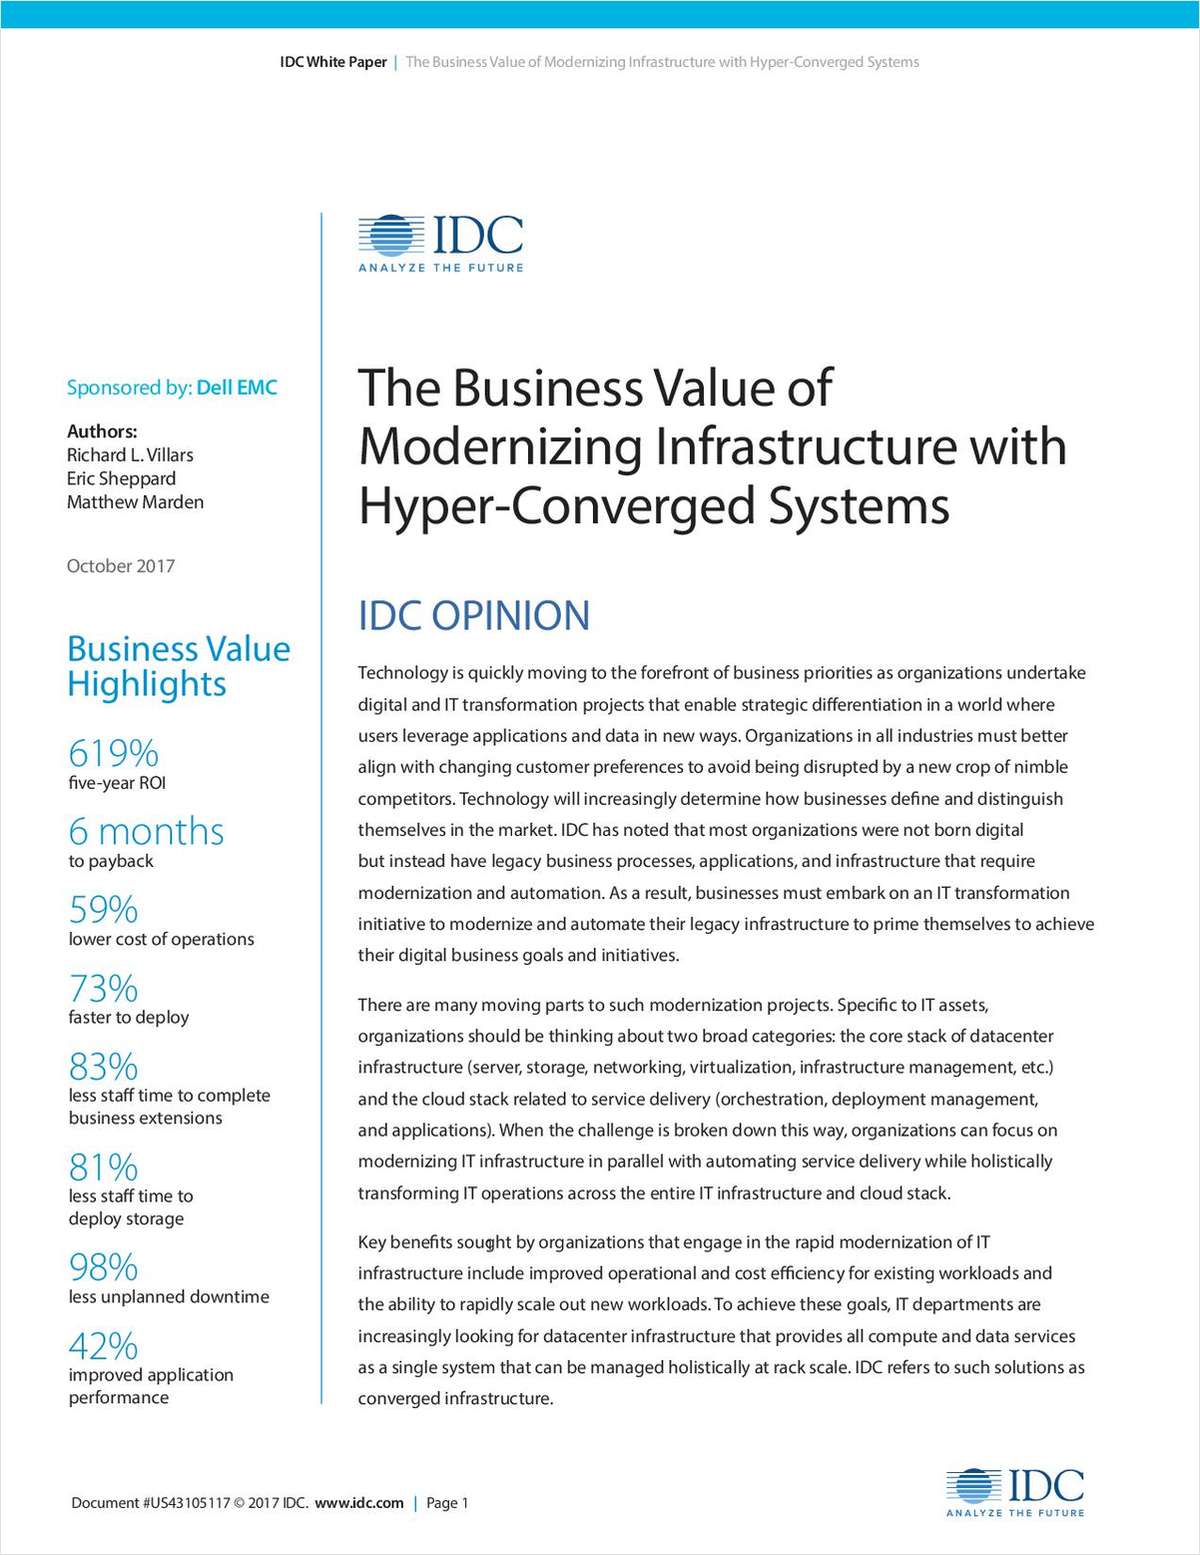 The Business Value of Modernizing Infrastructure with Hyper-Converged Systems